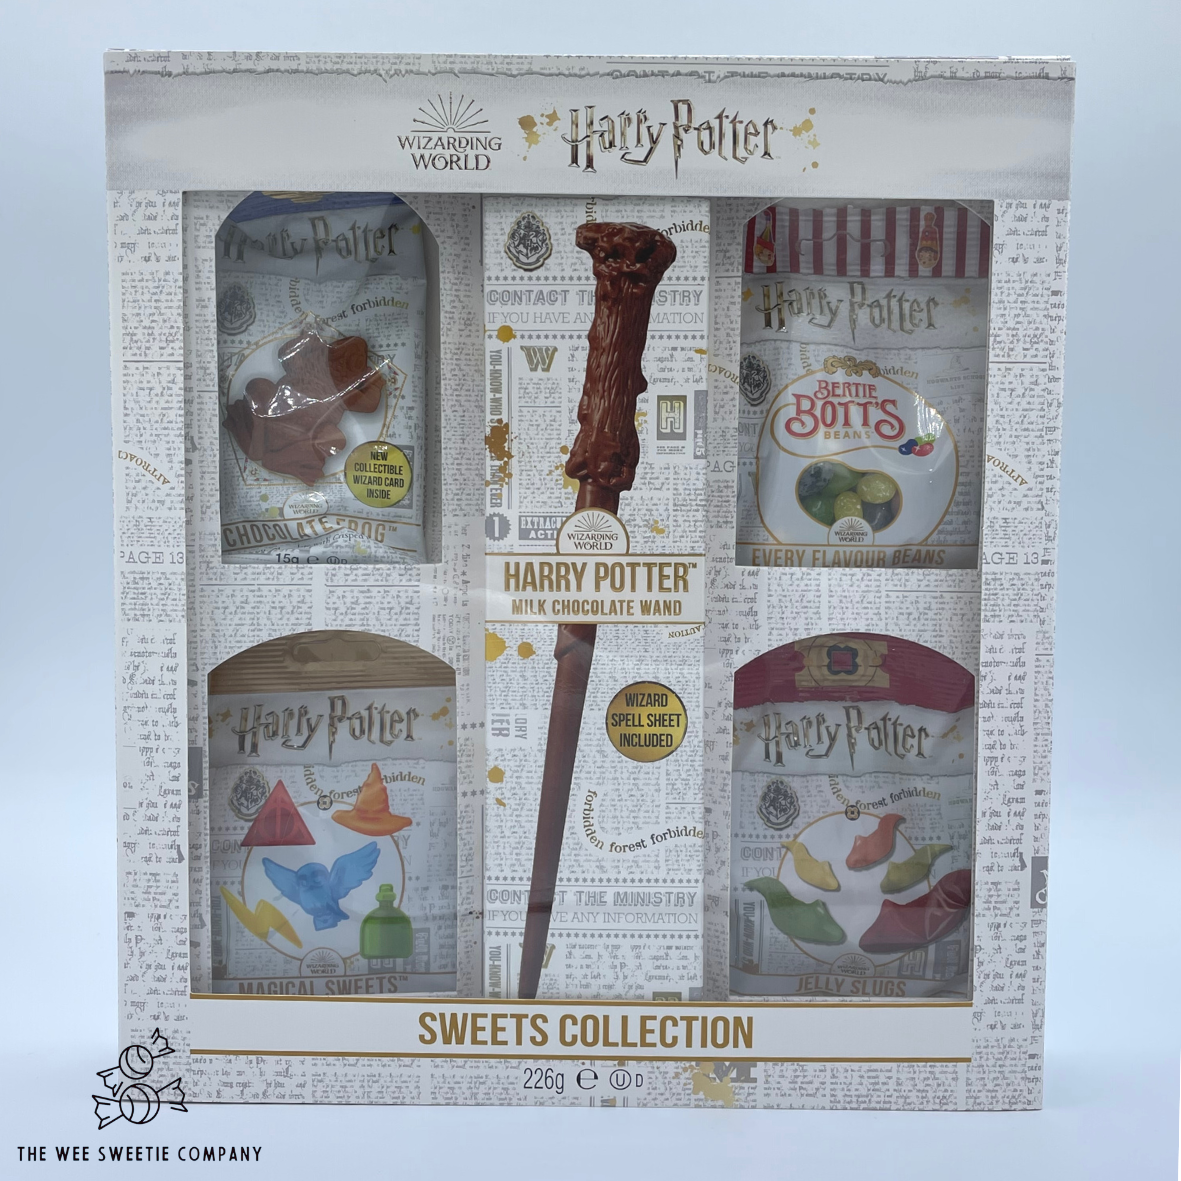 Harry Potter Sweets Collection Gift Box 226g (CLEARANCE - SEE DATE)